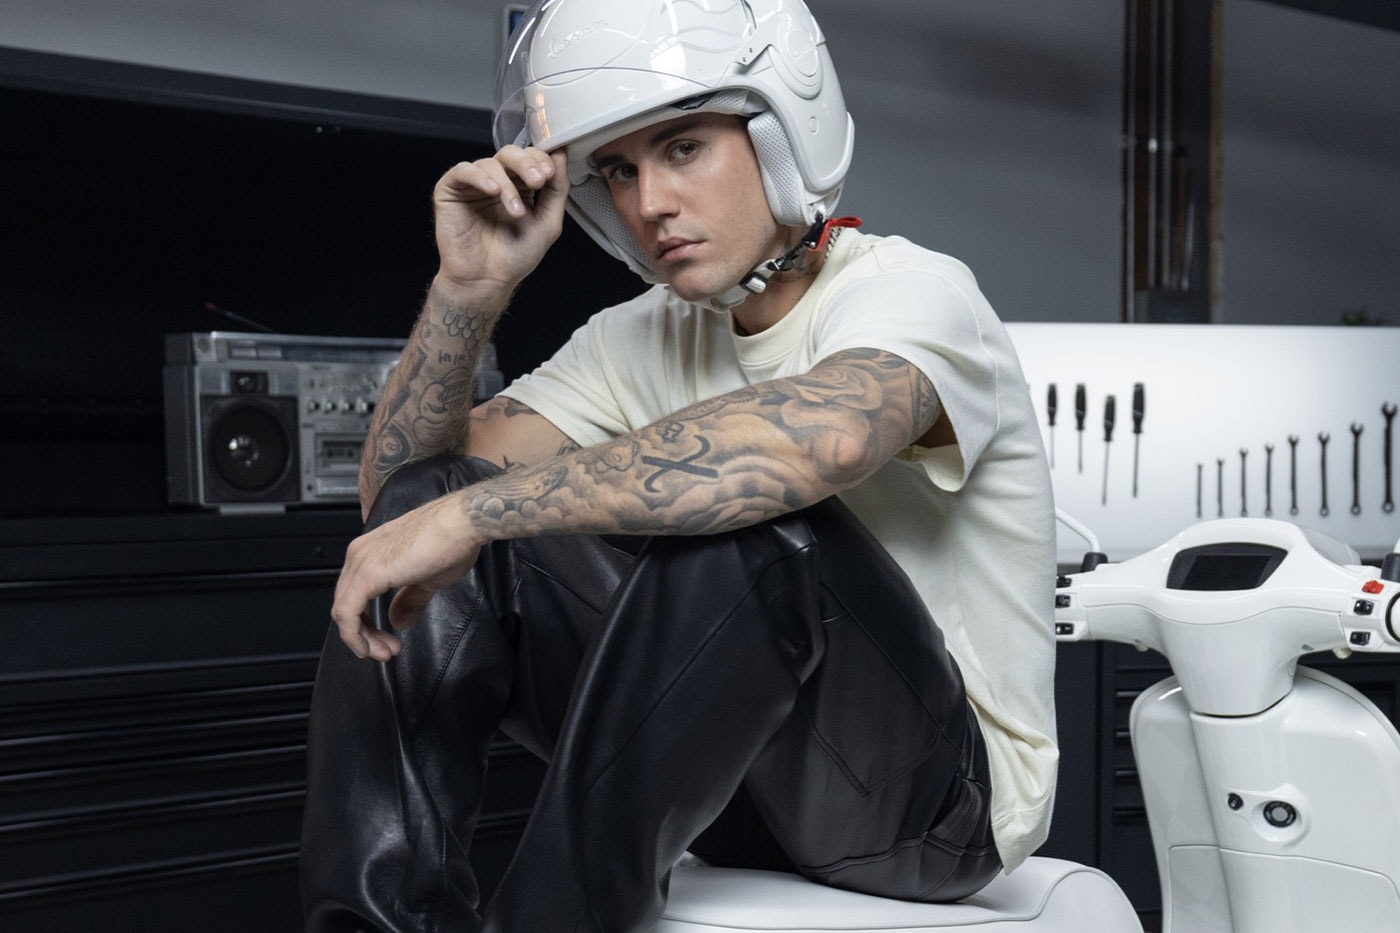 Justin Bieber and Vespa Unveils New Collaborative Model Designed by the Singer peaches justice pop culture giorgio arman chrisian dior sean wotherspon europe moped 